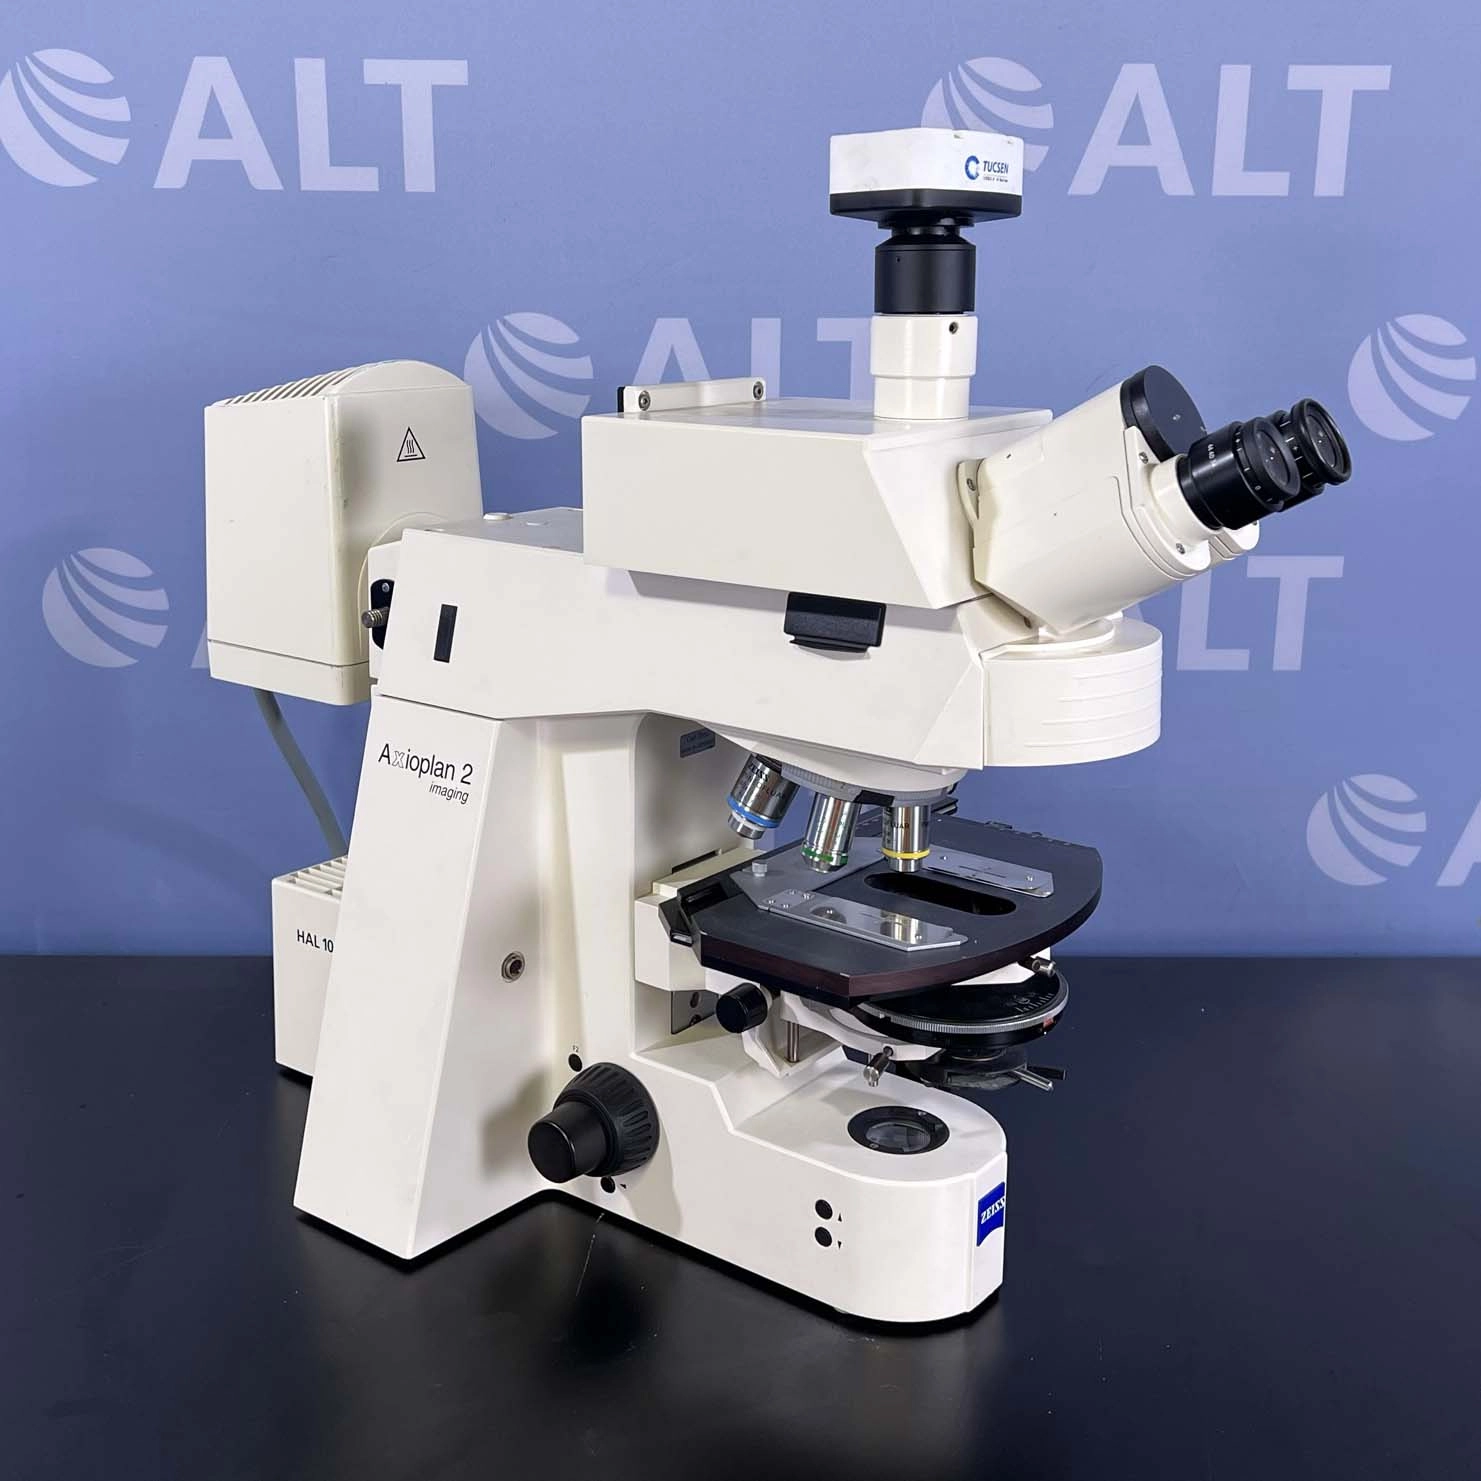 Zeiss Axioplan 2 Microscope With ImageProVision Camera &amp; LEJ FluorArc Fluorescence Power Supply